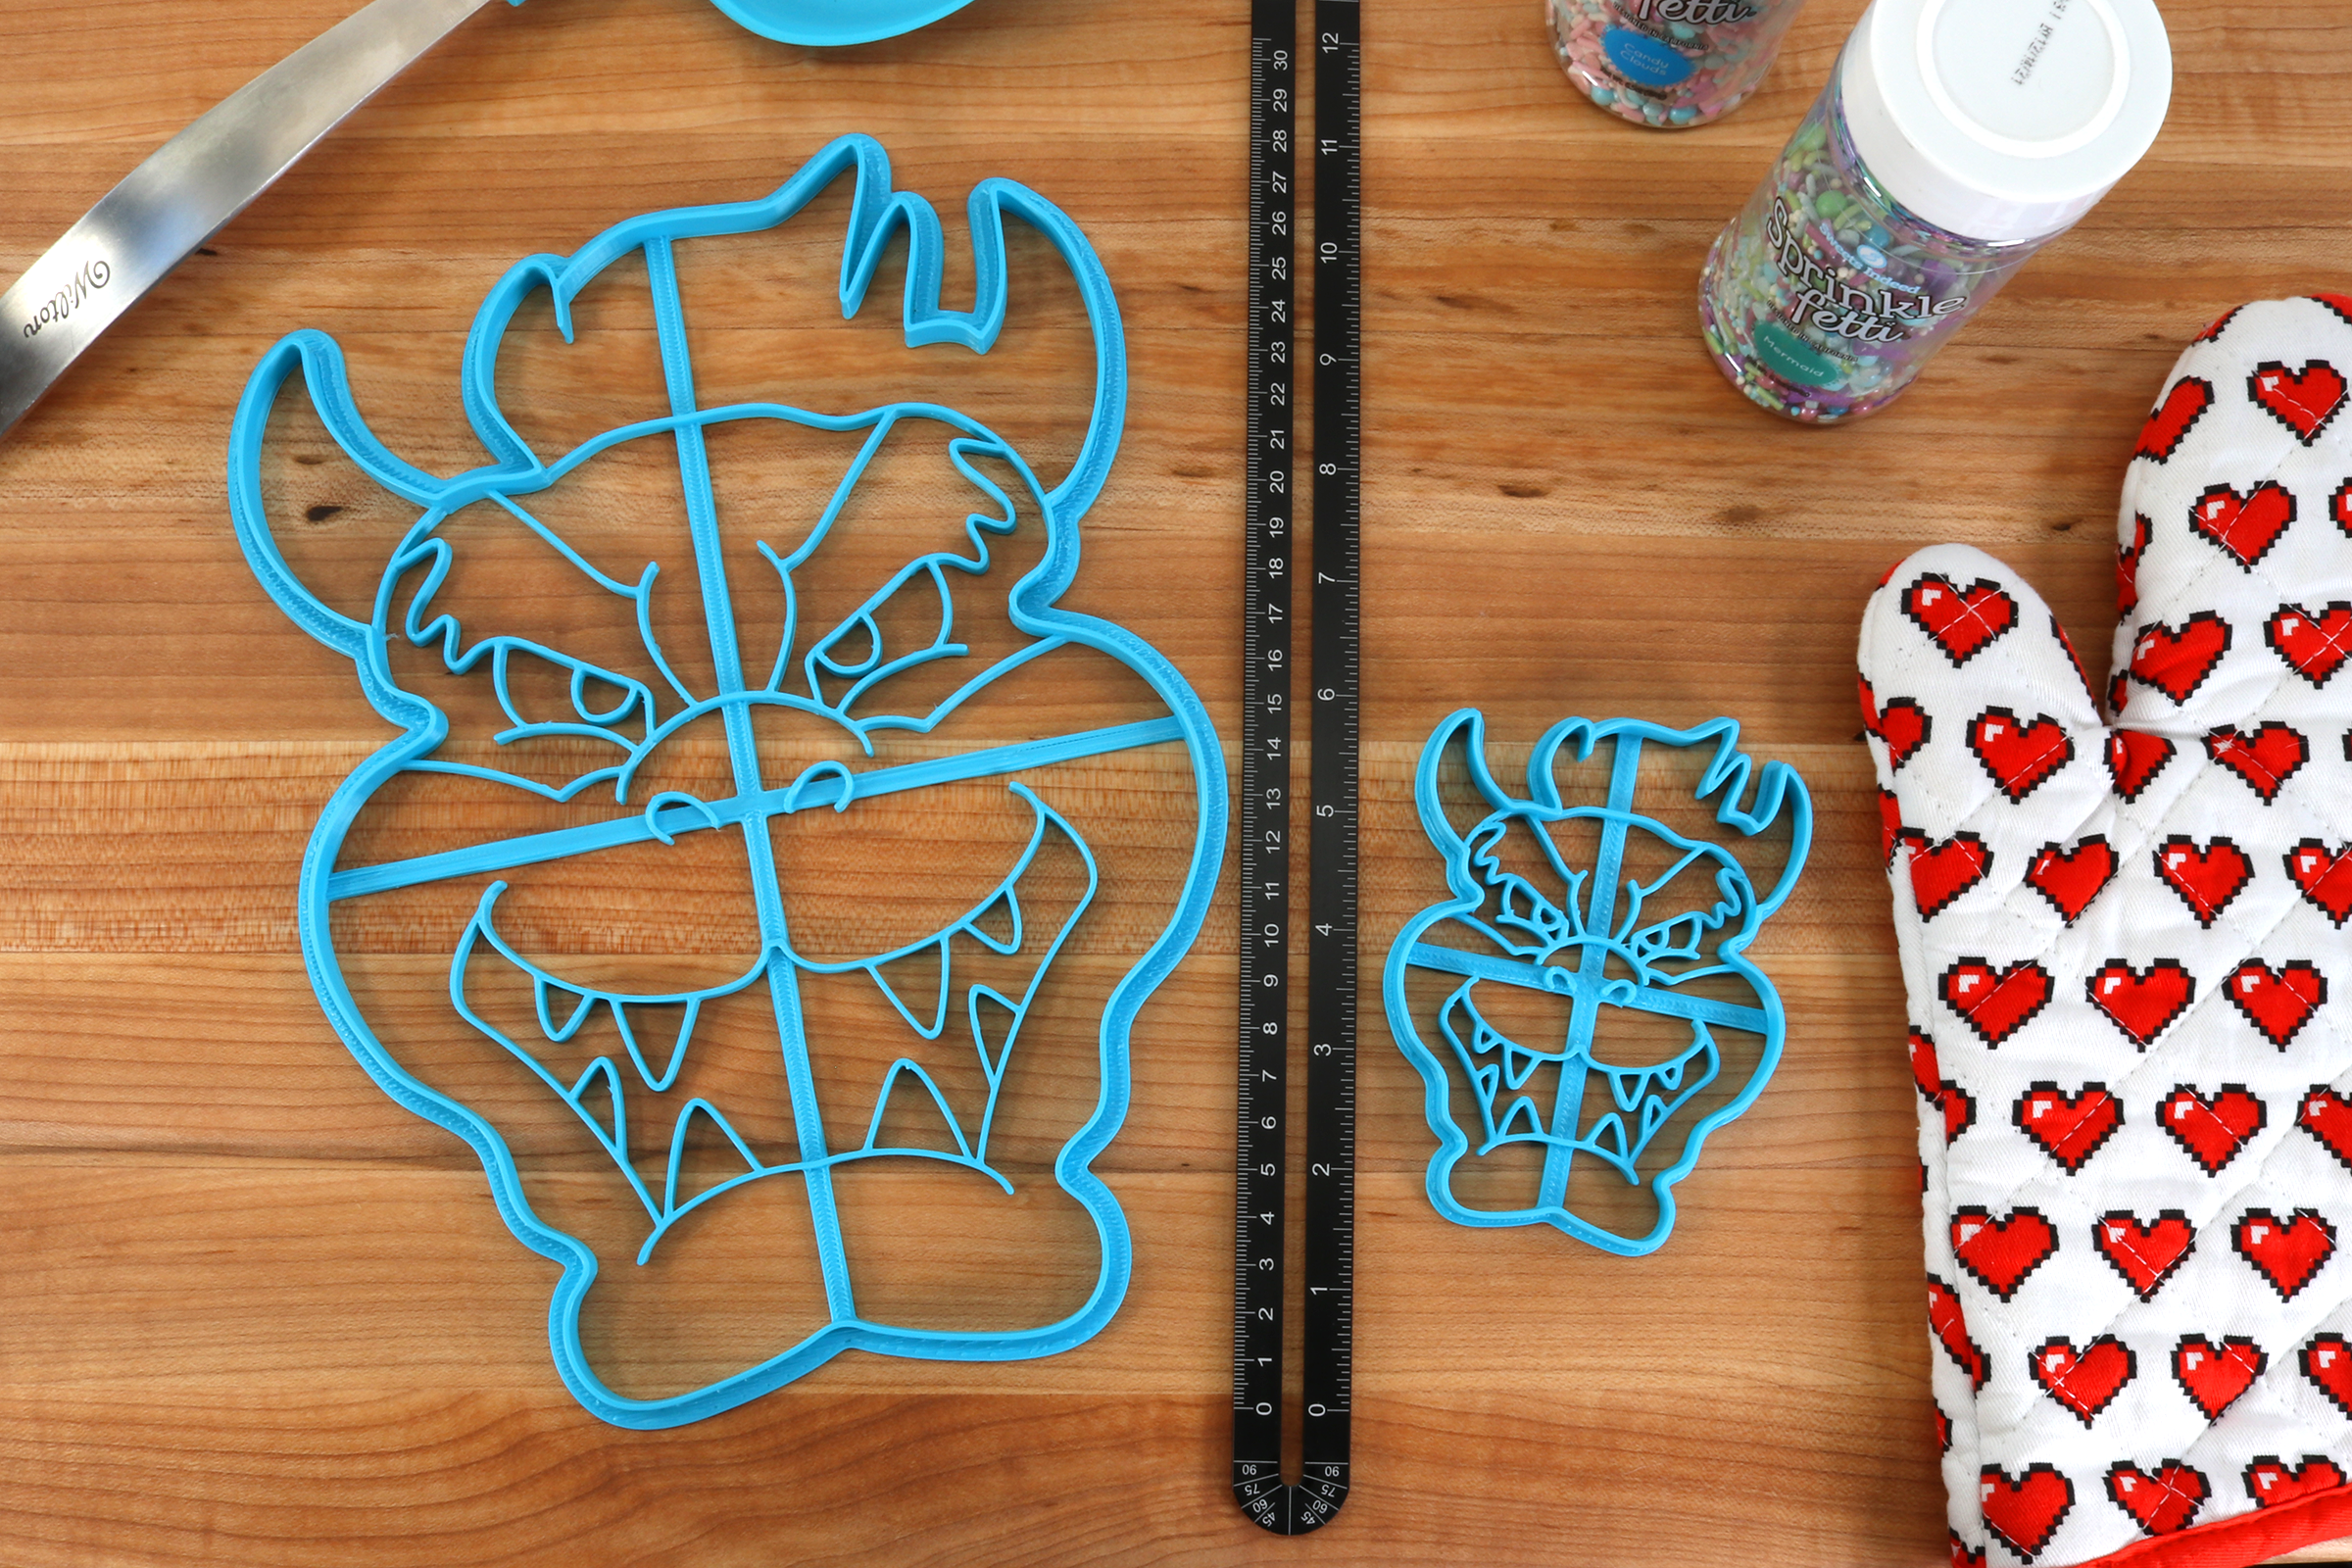 Gerudo FONT Cookie Cutters - Fondant Letters, Letters for Cake decorating